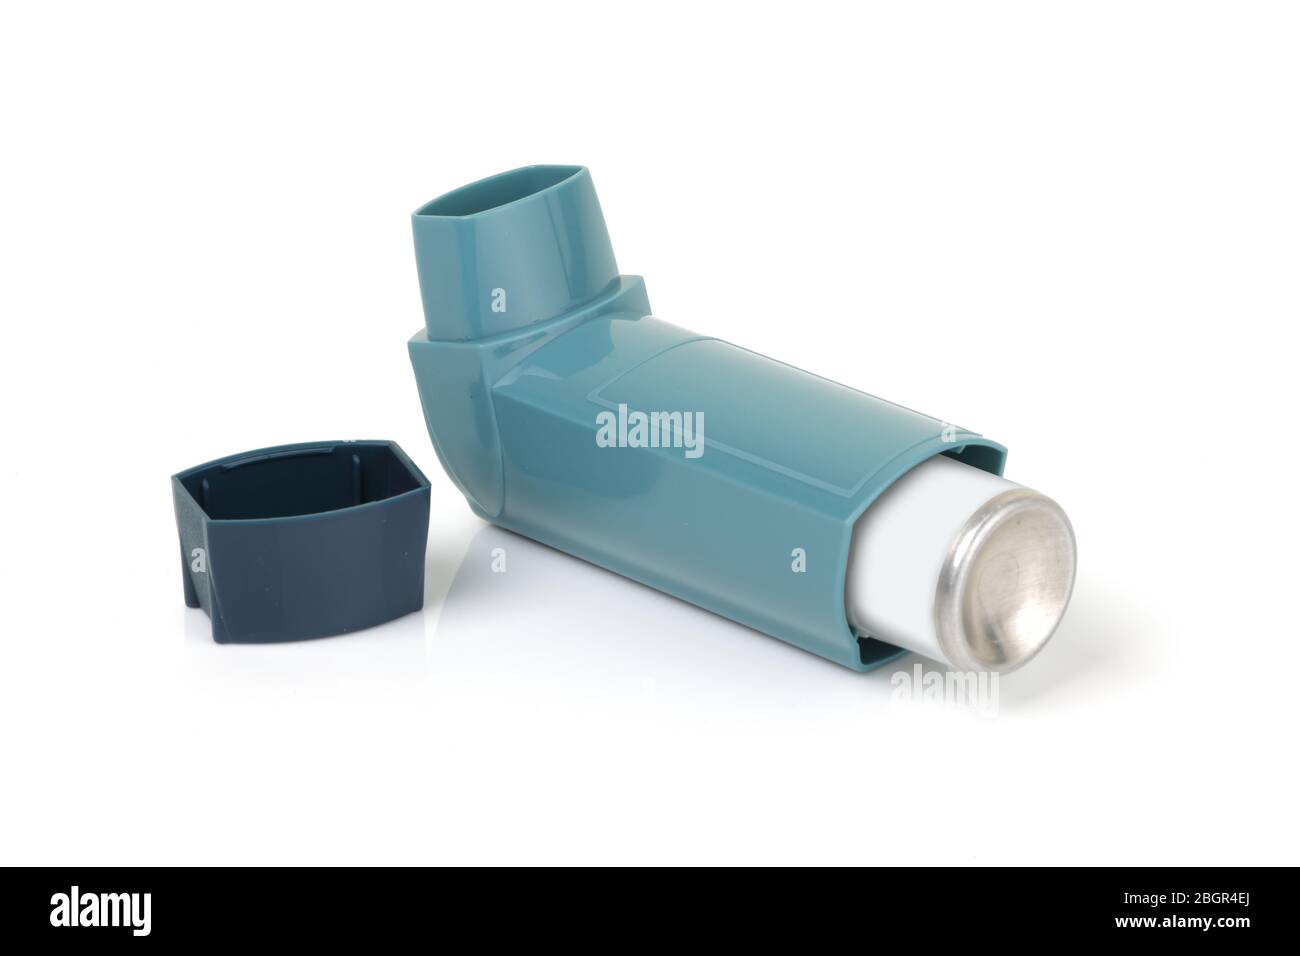 Asthma inhaler on a white background with light reflection Stock Photo